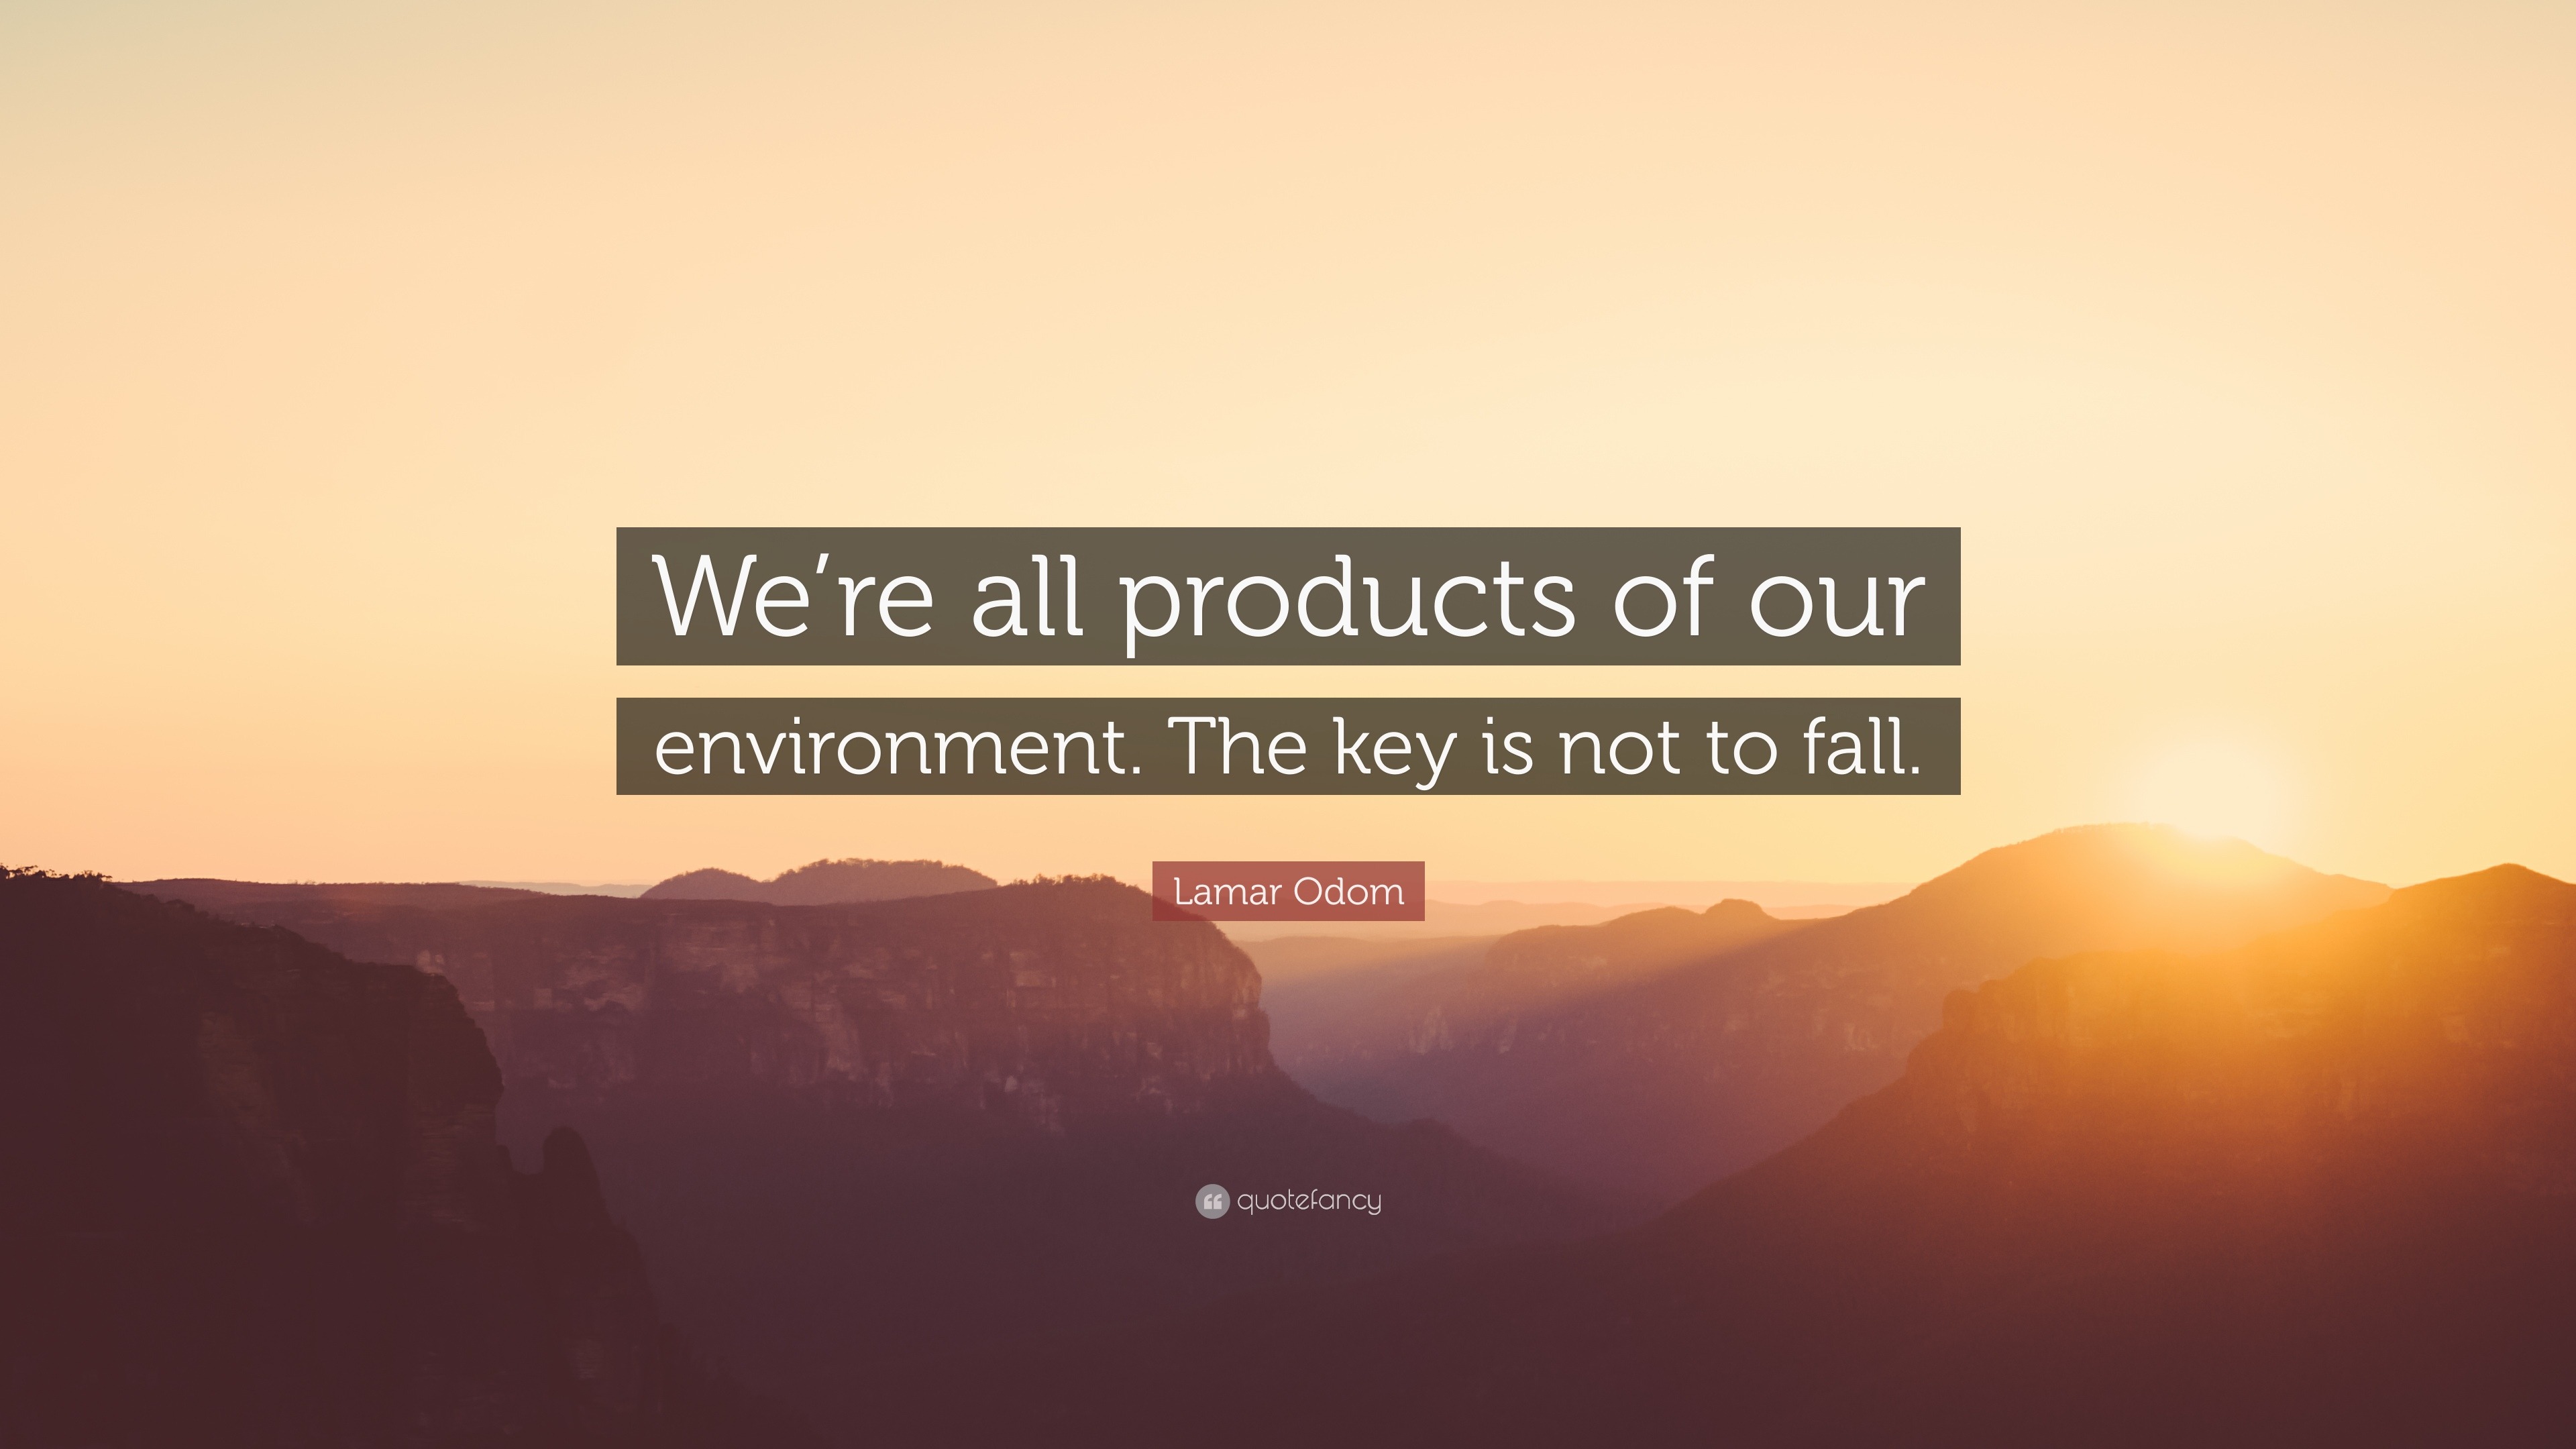 Lamar Odom Quote: “We’re all products of our environment. The key is